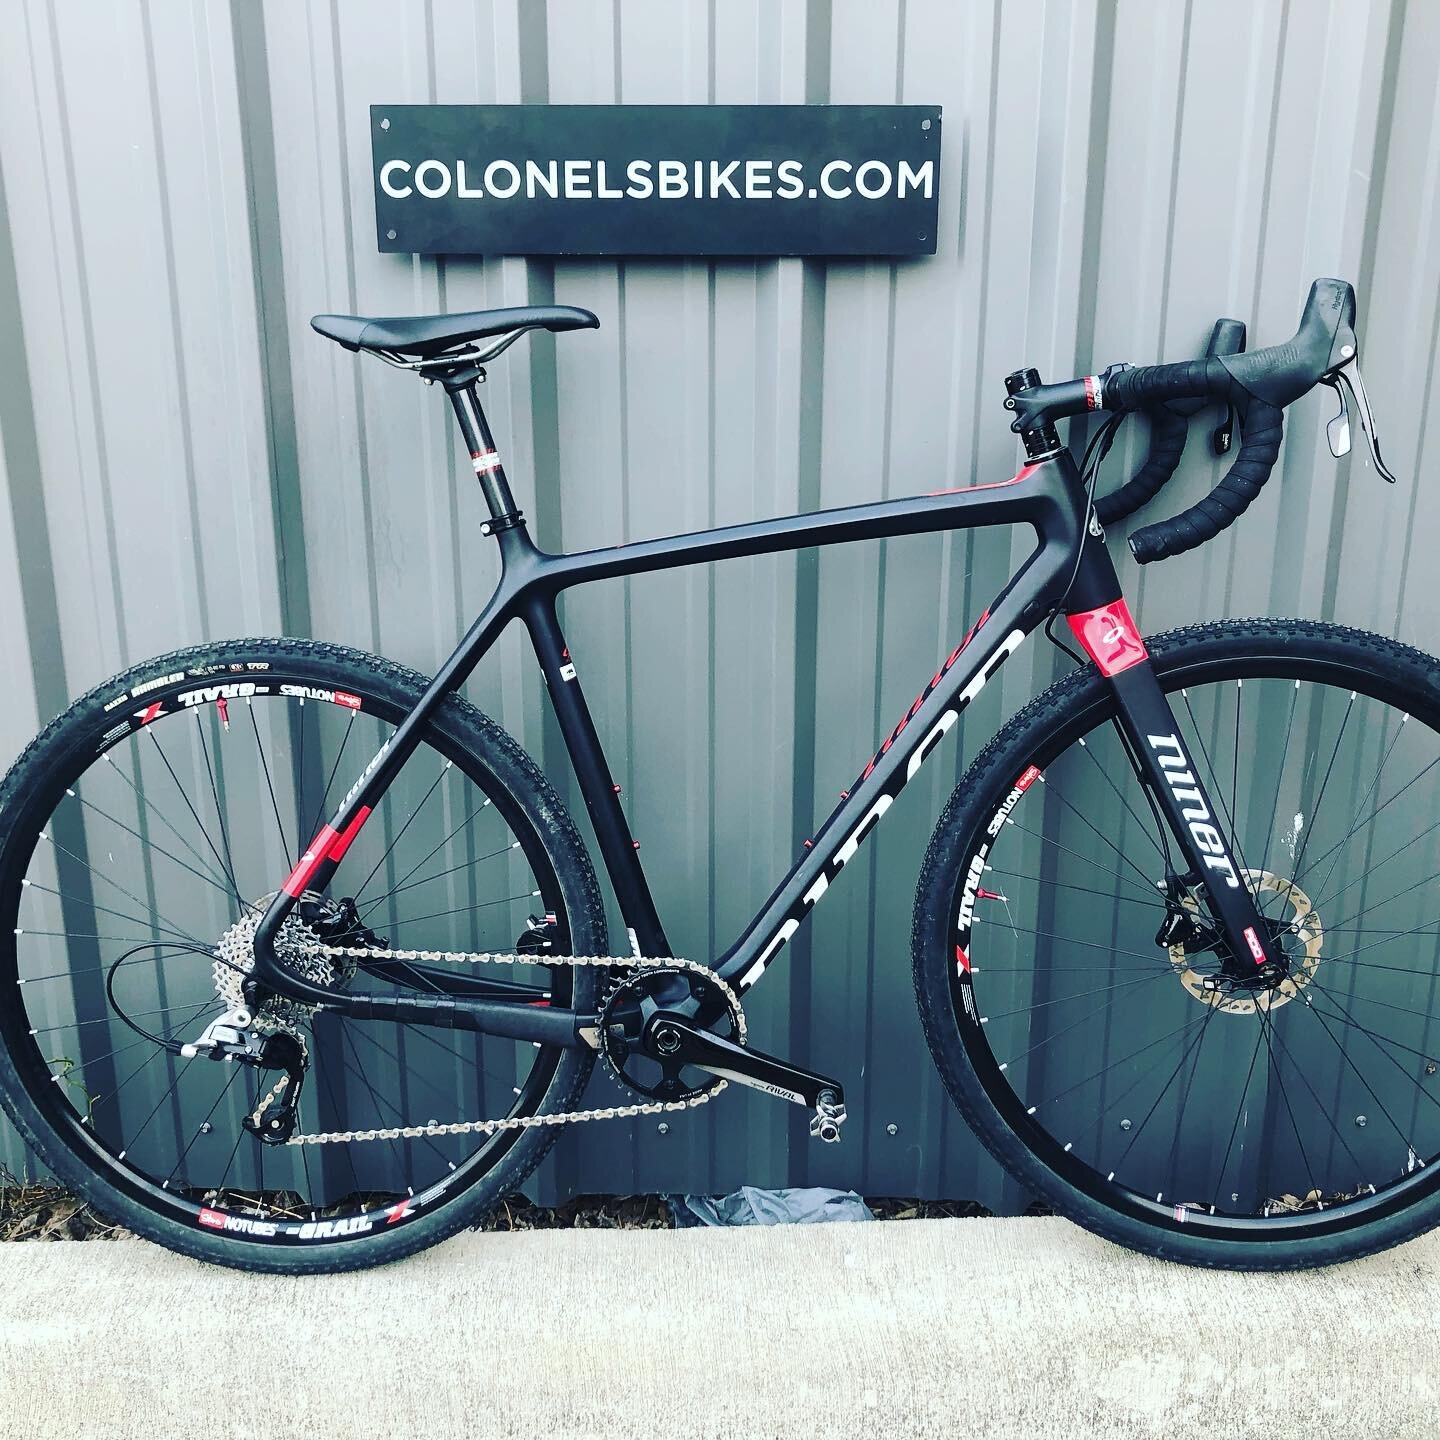 Price drop on this beauty! Now $2200. Excellent condition #ninerbikes BSB9RDO in size 56cm. Gravel or Cyclocross capable. All carbon construction. Stop by for a test ride. #colonelsbikes #usedbikesdallasfortworth (817)924-1333